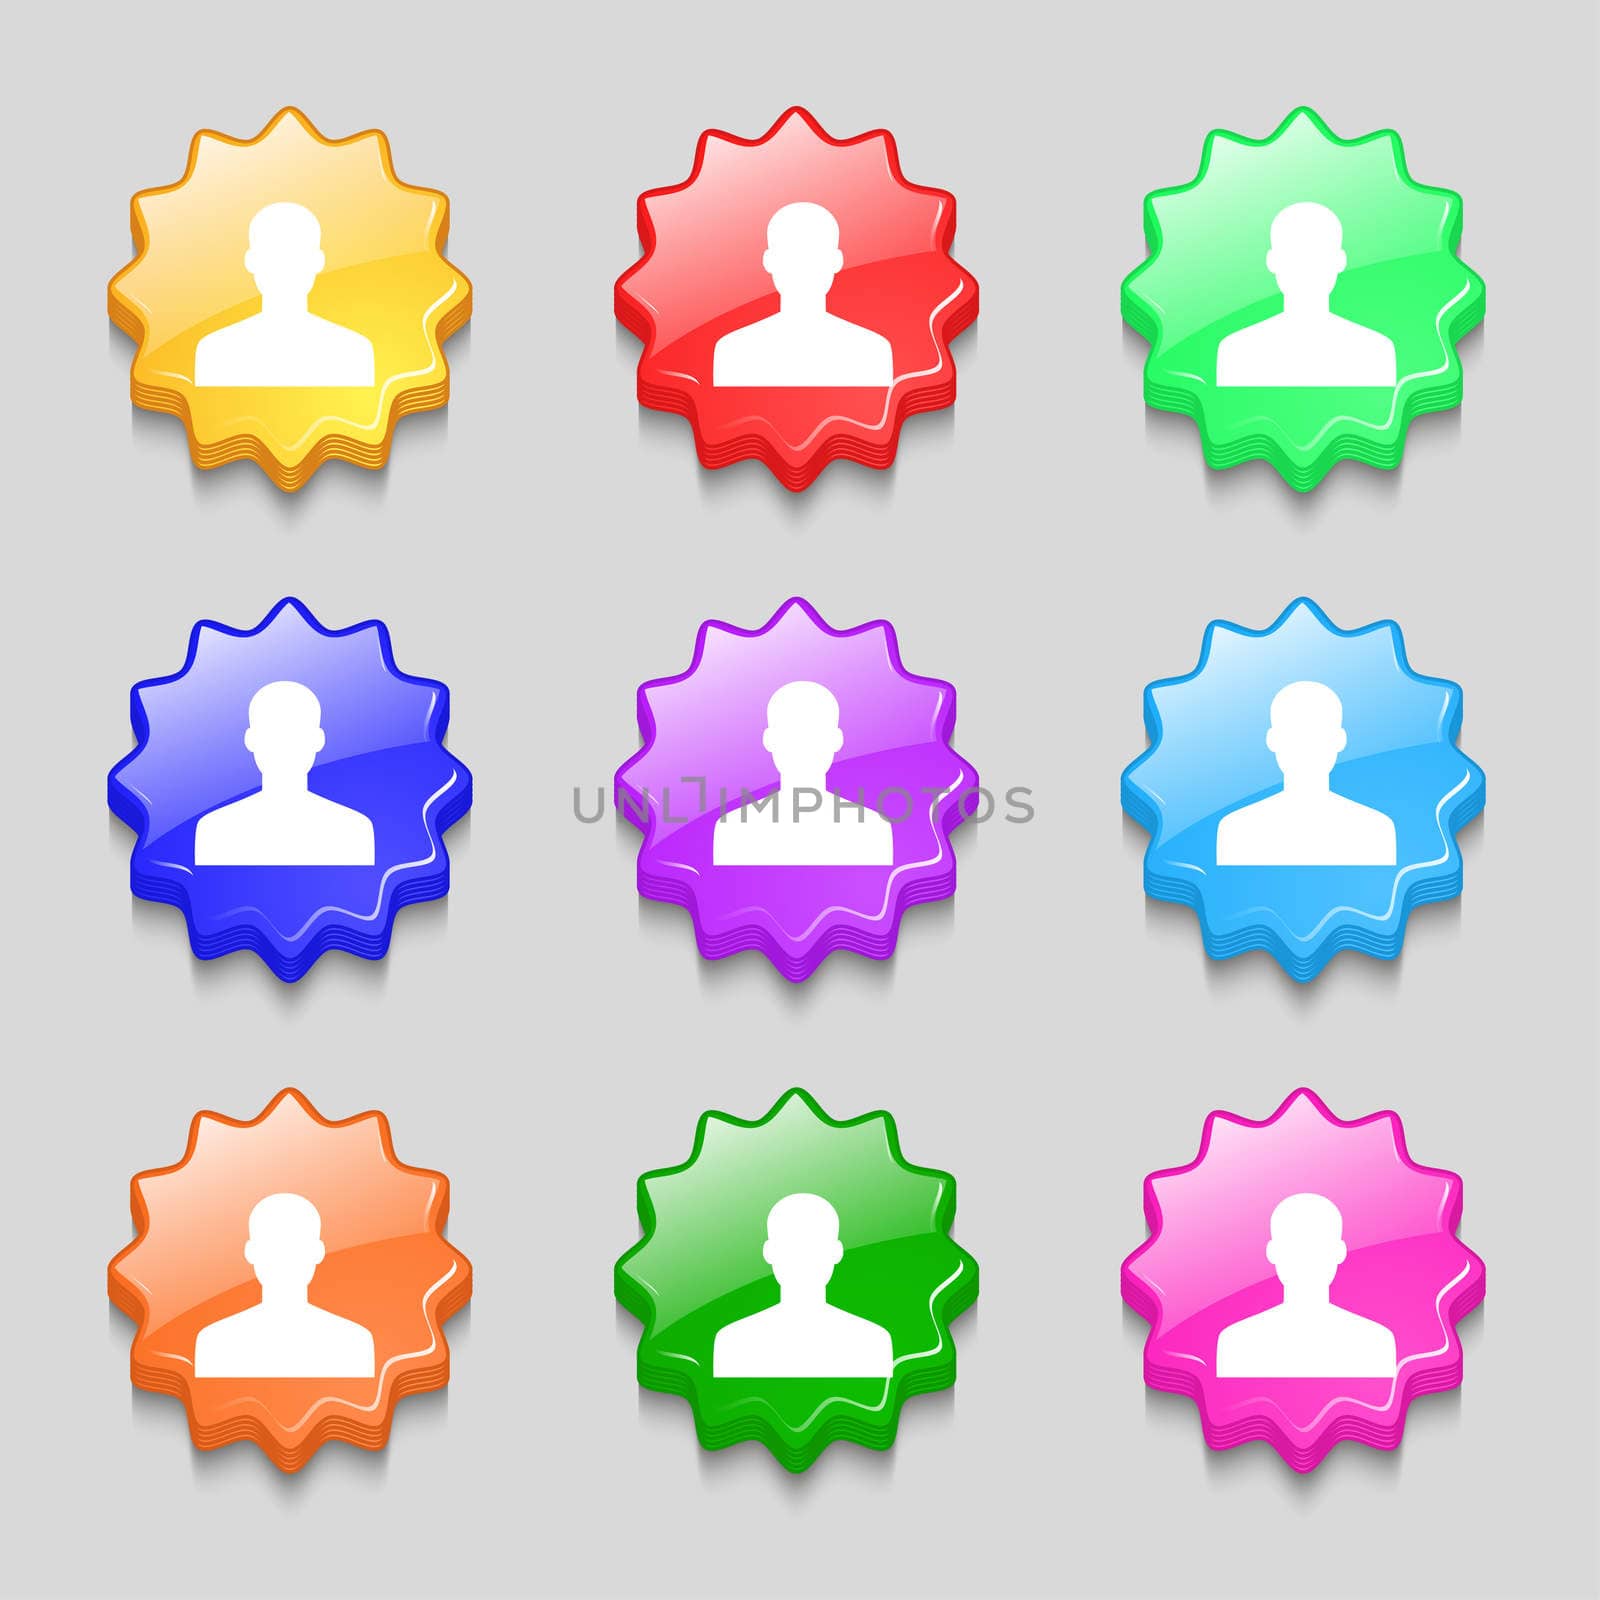 User, Person, Log in icon sign. symbol on nine wavy colourful buttons. illustration